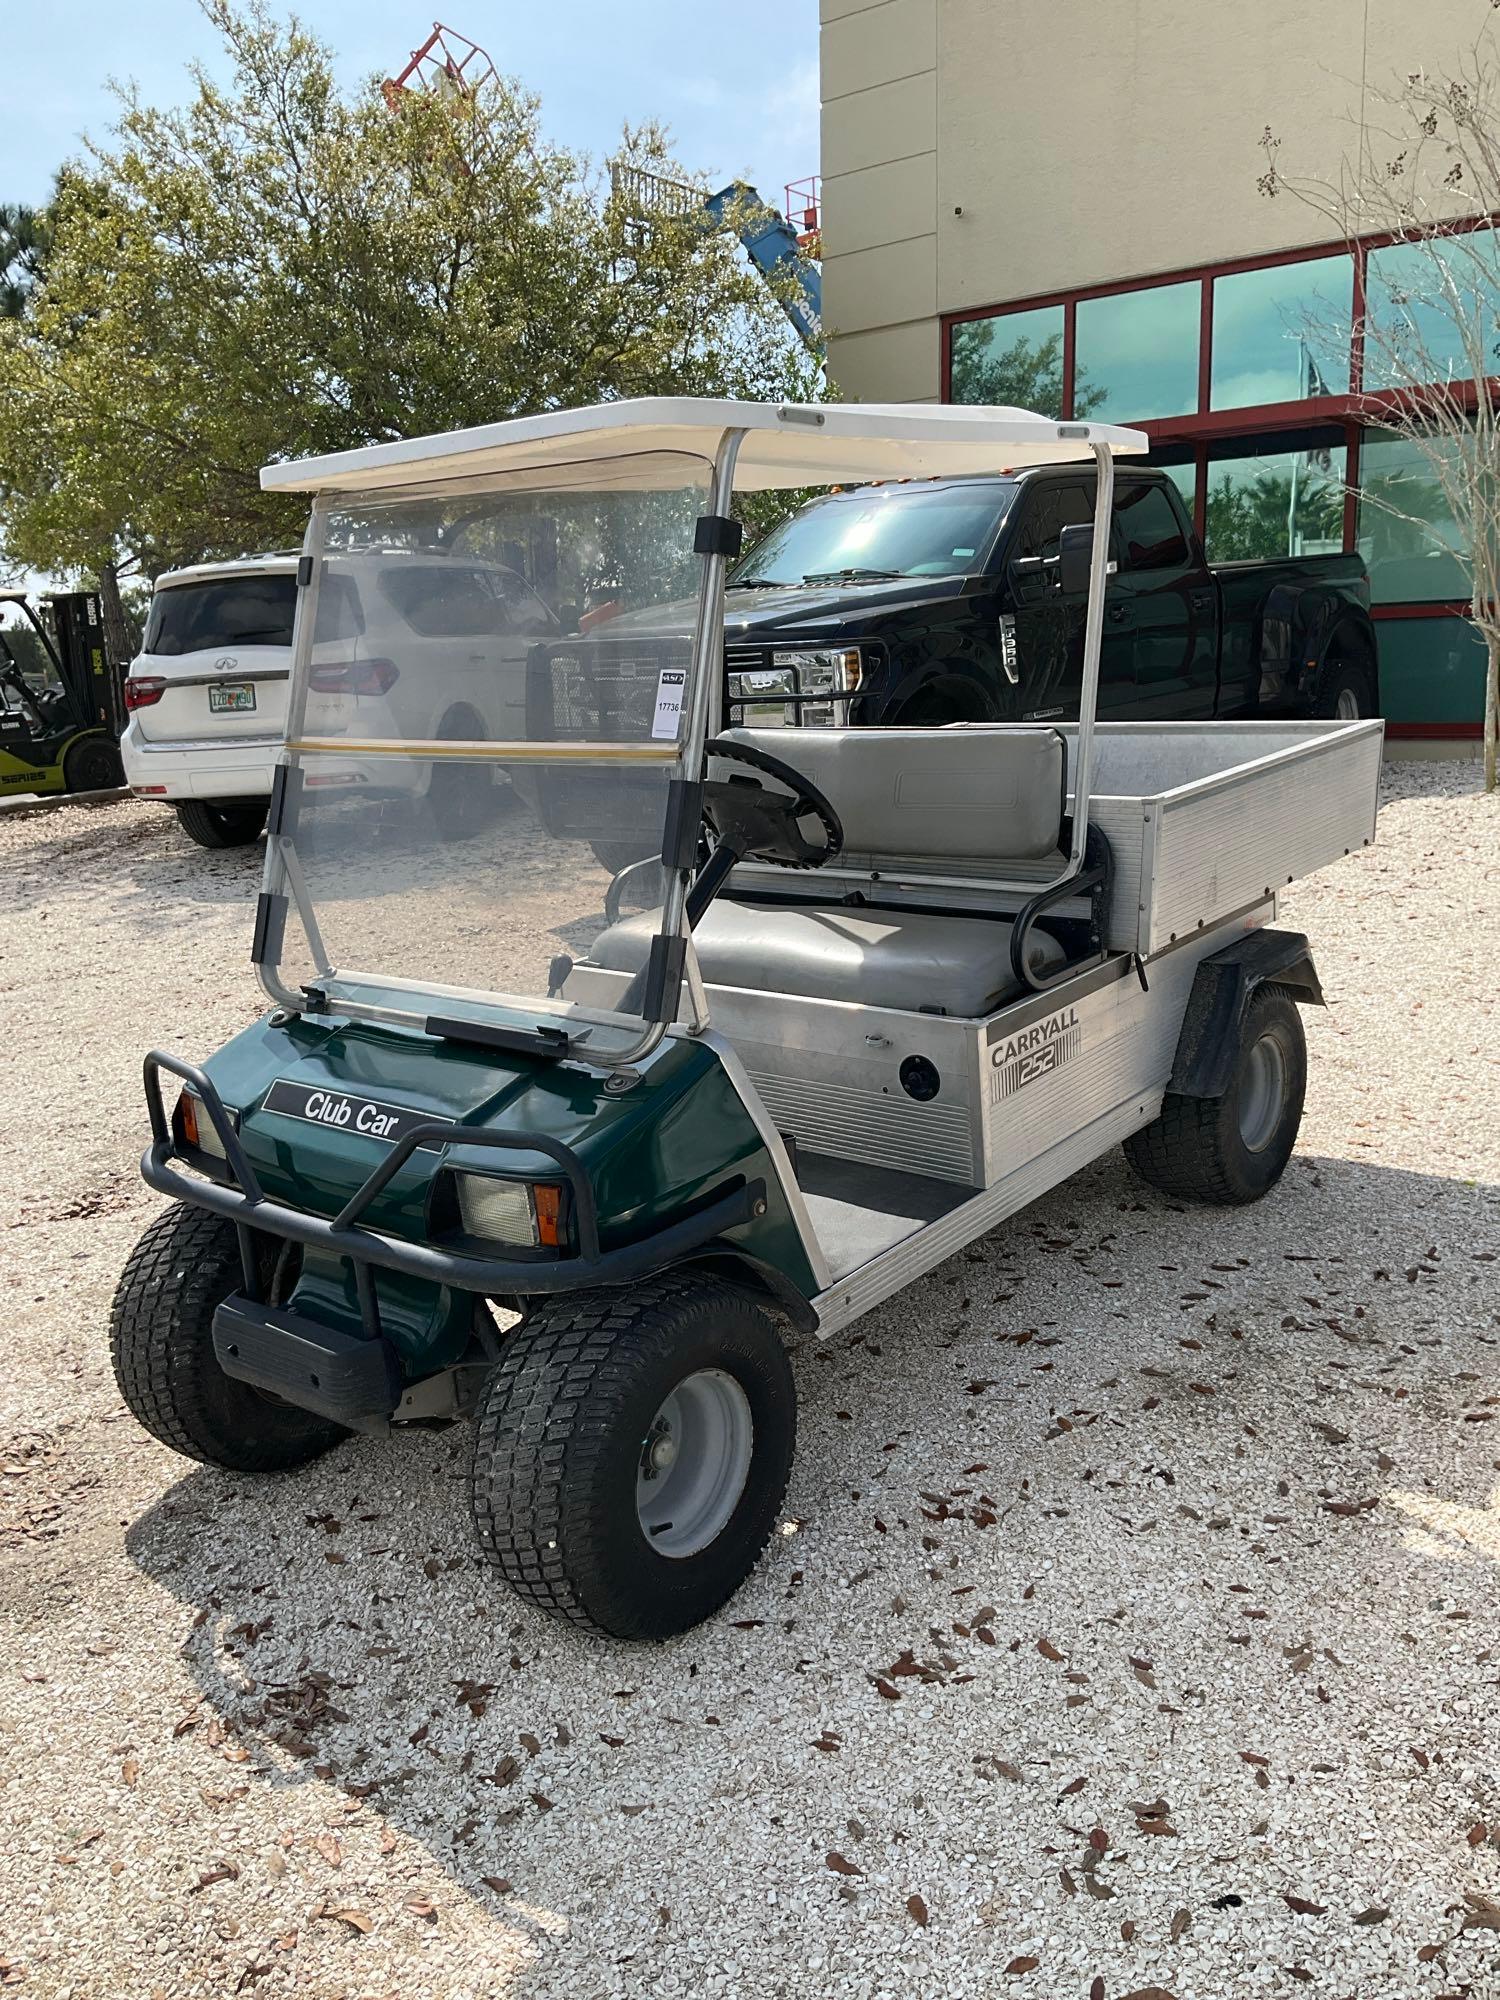 CLUB CAR CARRYALL 252 , GAS POWERED, MANUAL DUMP BED, HITCH , BILL OF SALE ONLY, RUNS & DRIVES